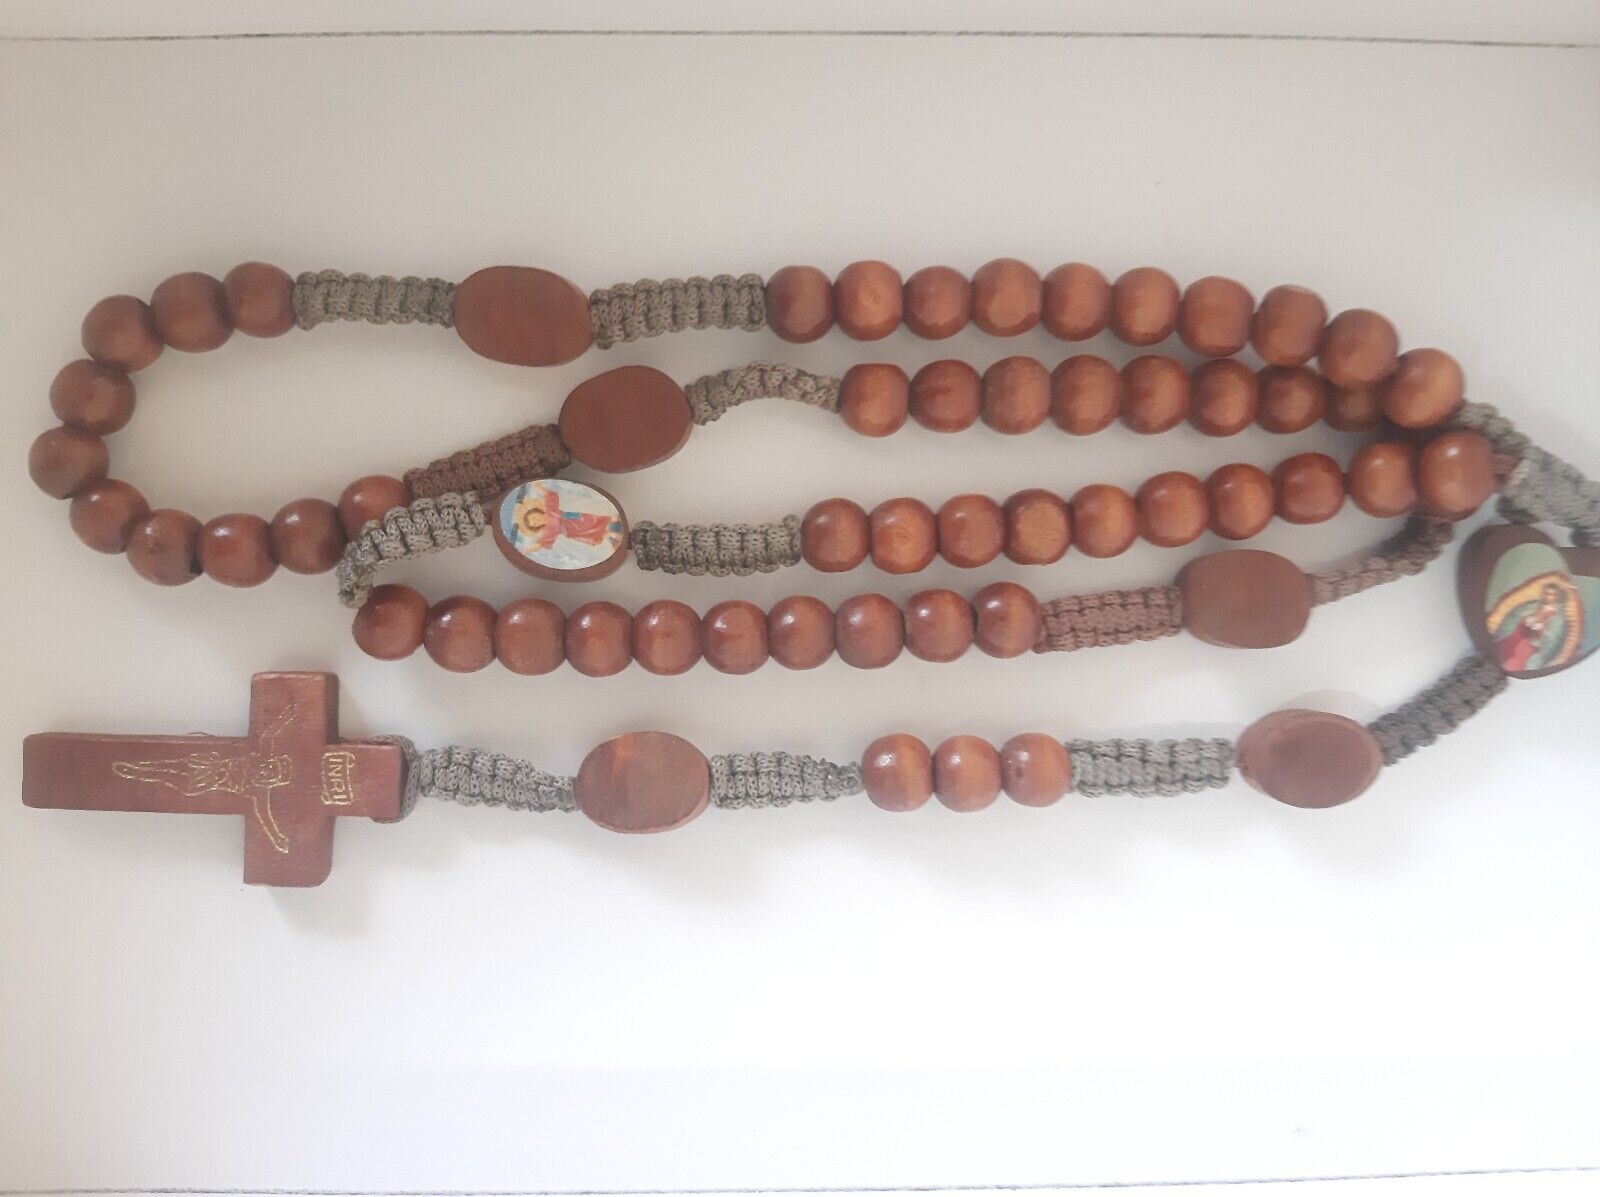 Zambian antique handcrafted wooden rosary